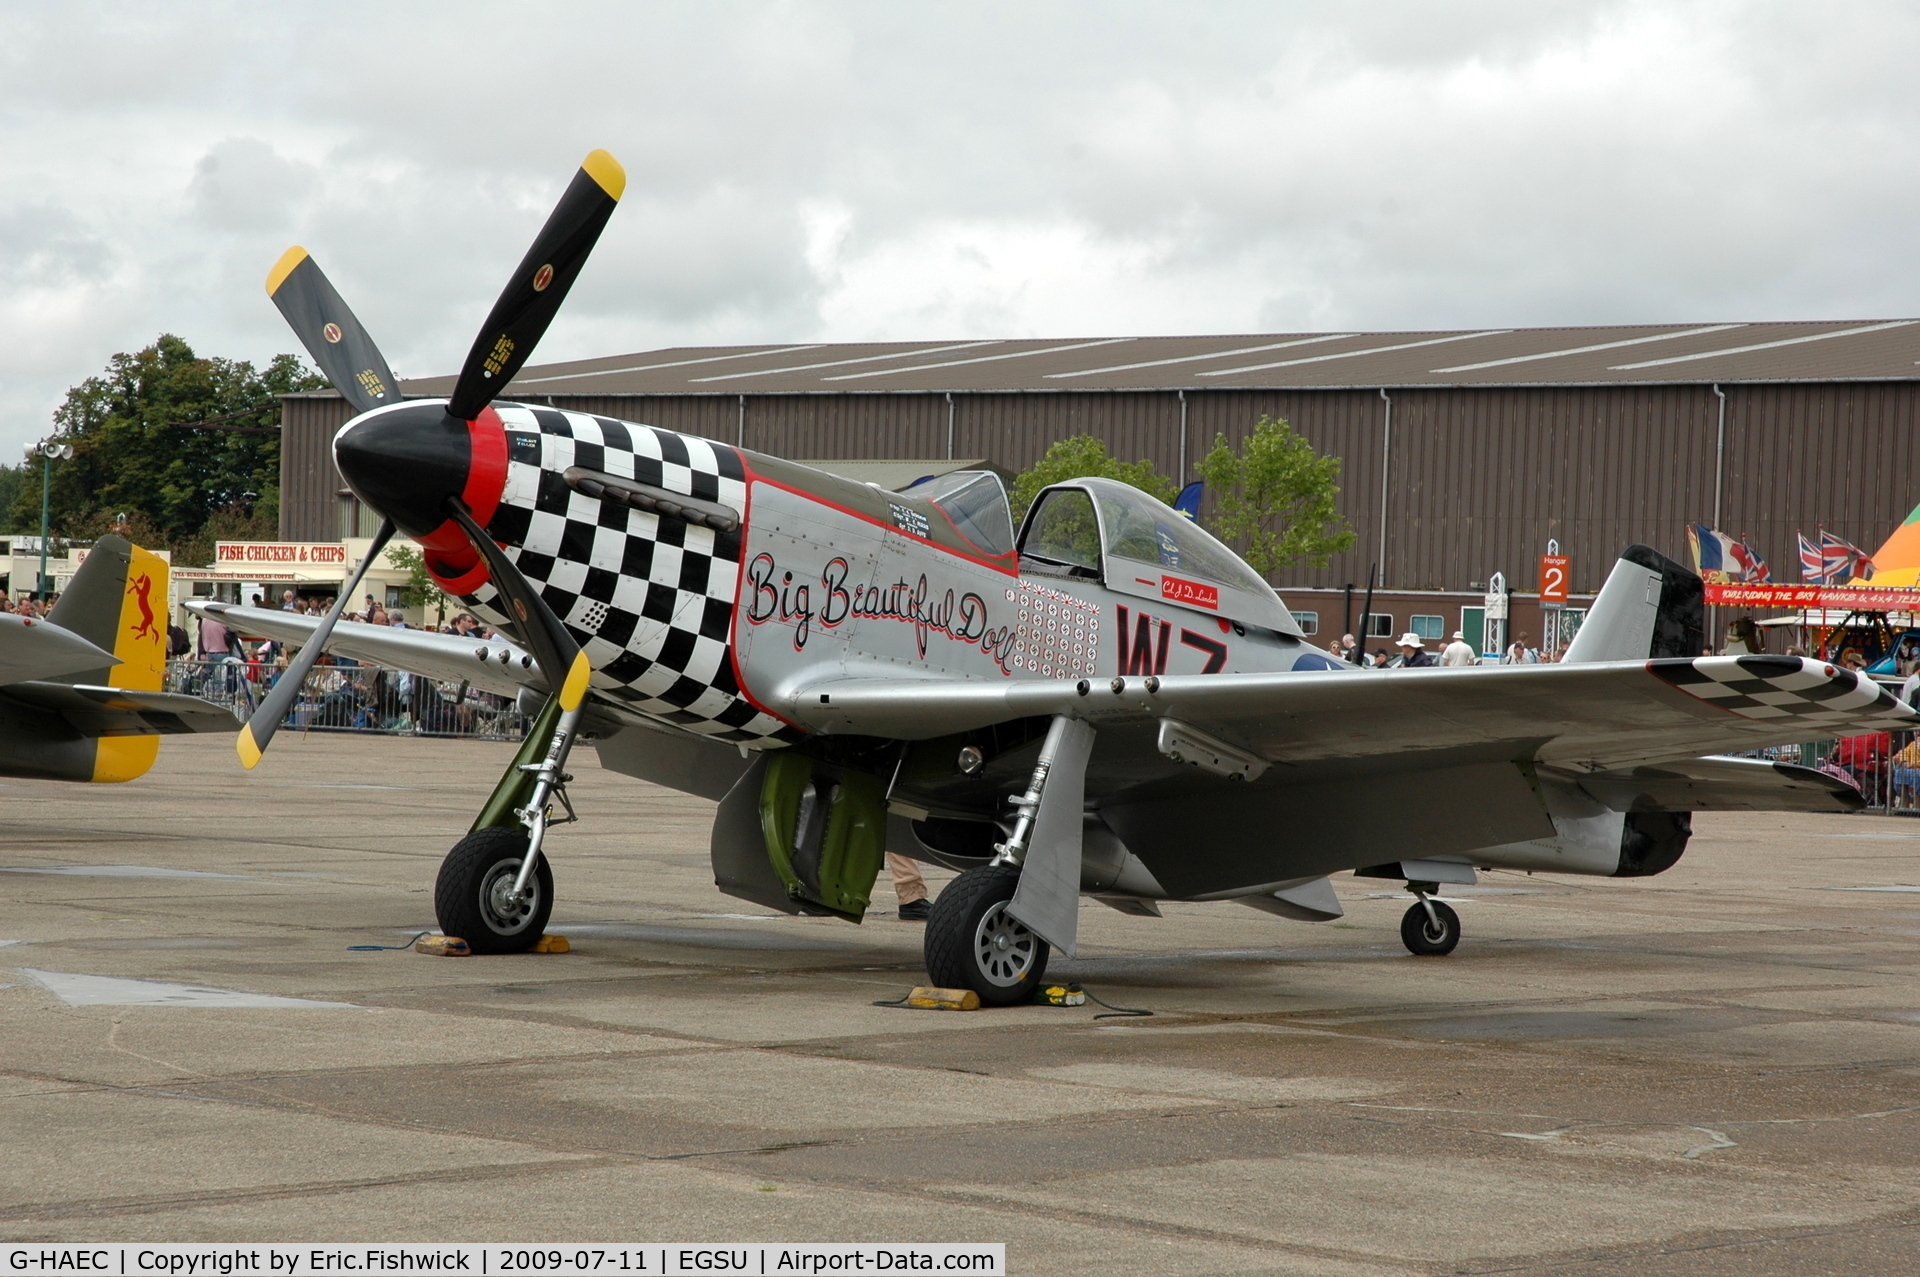 G-HAEC, 1951 Commonwealth CA-18 Mustang 22 (P-51D) C/N CACM-192-1517, 'Big Beautiful Doll' at Duxford Flying Legends July 09